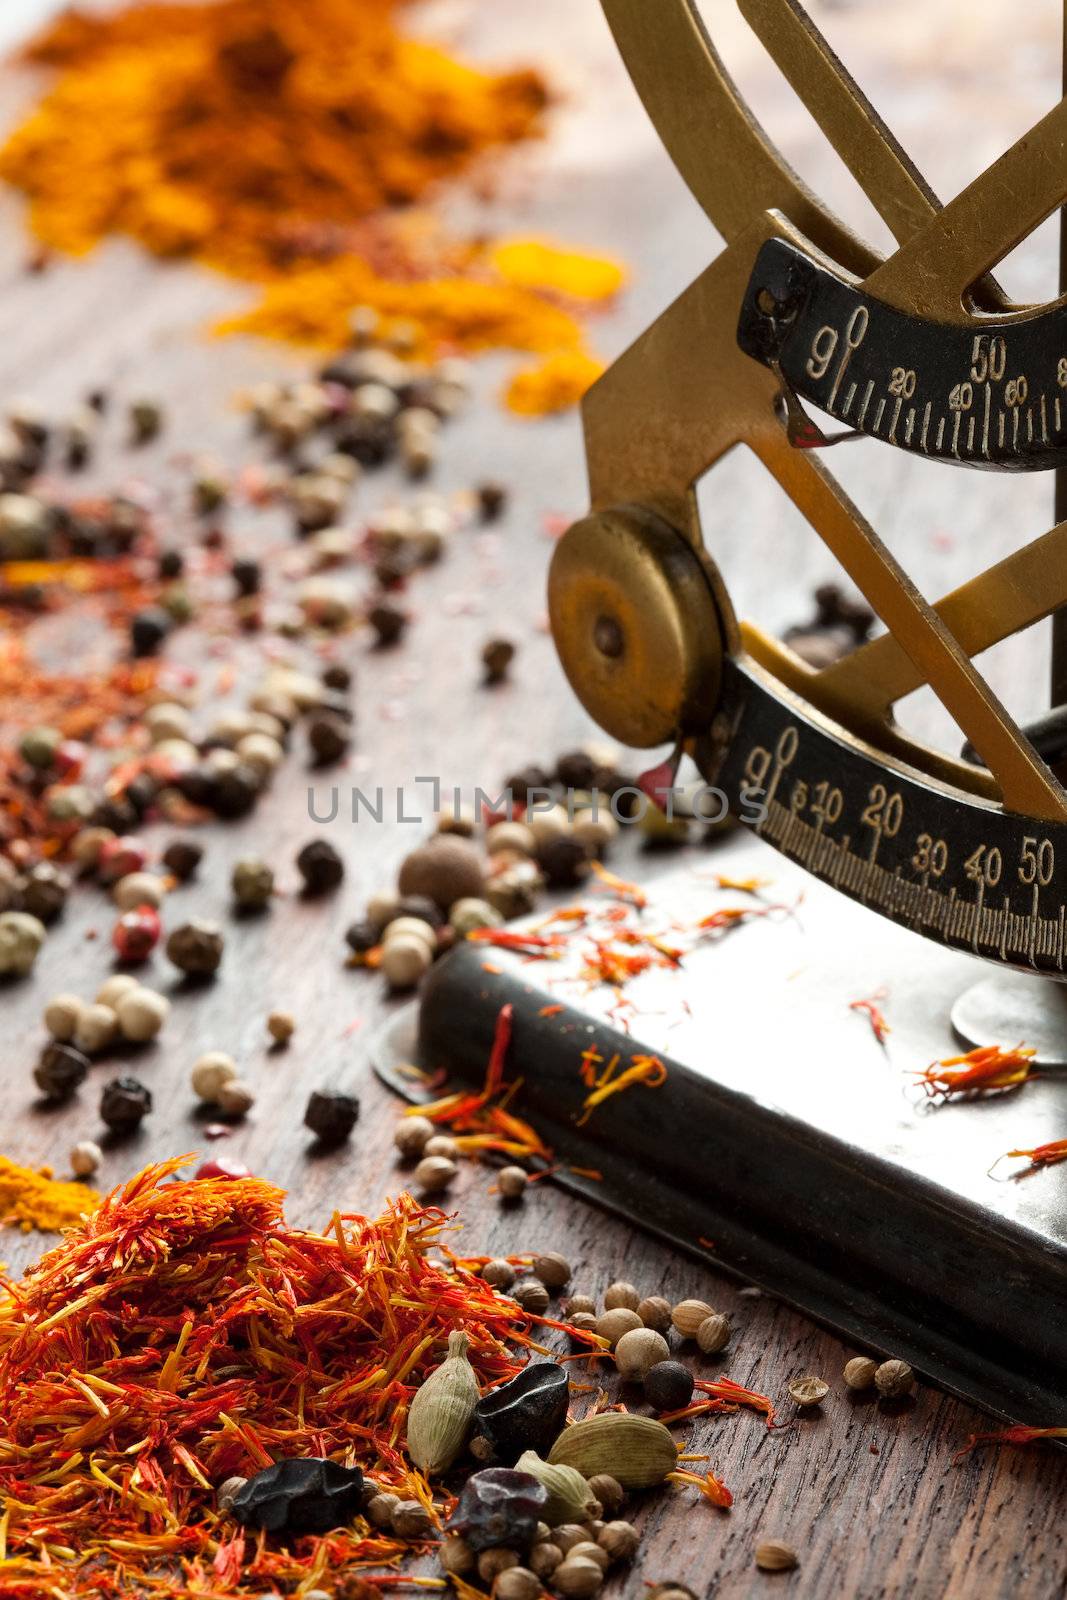 Spices and antique scales by Gravicapa